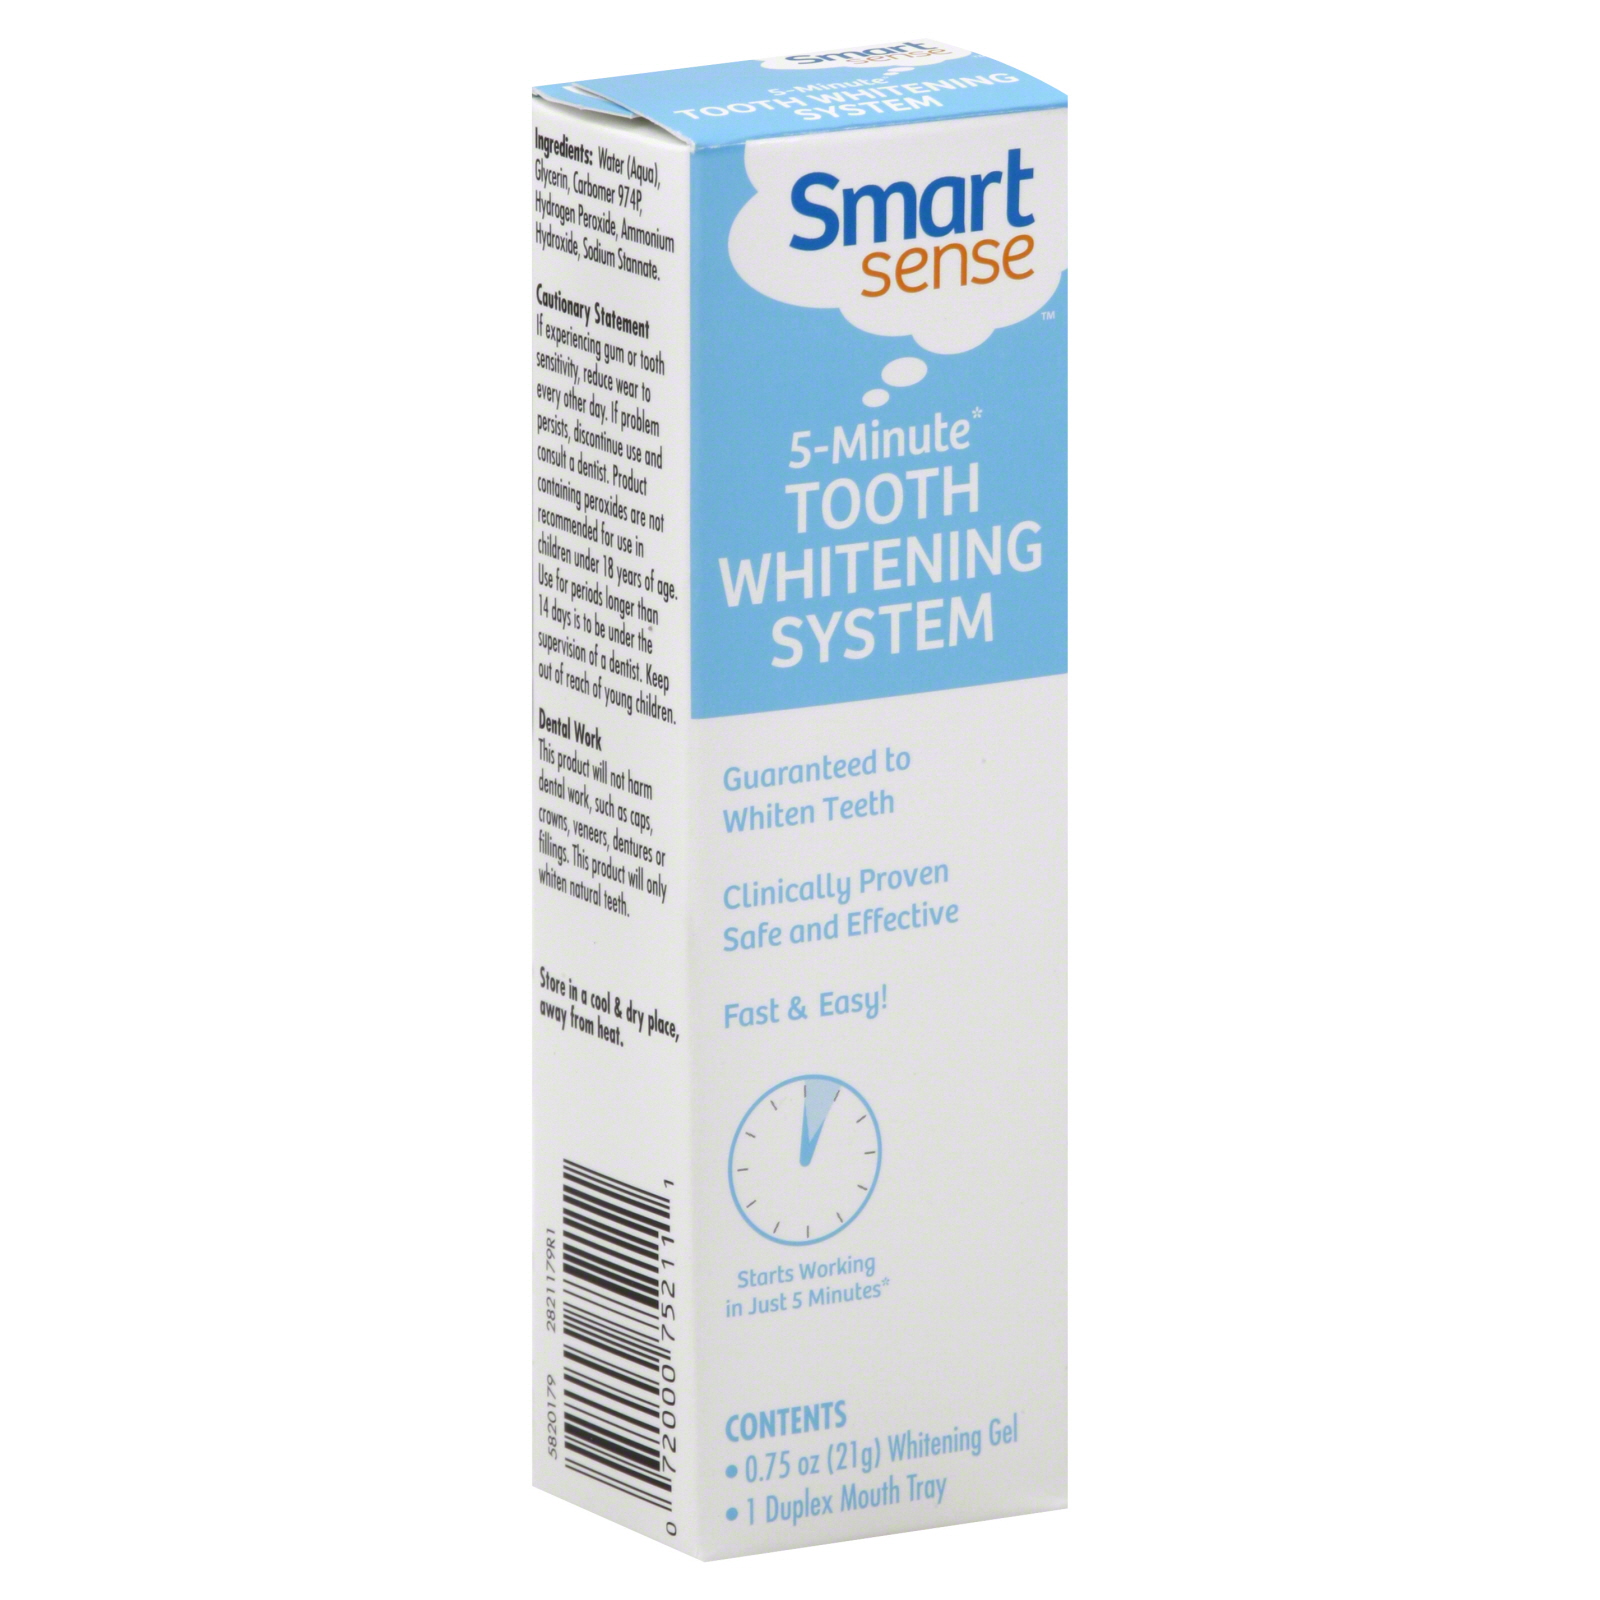 Smart Sense Tooth Whitening System, 5-Minute, 1 system